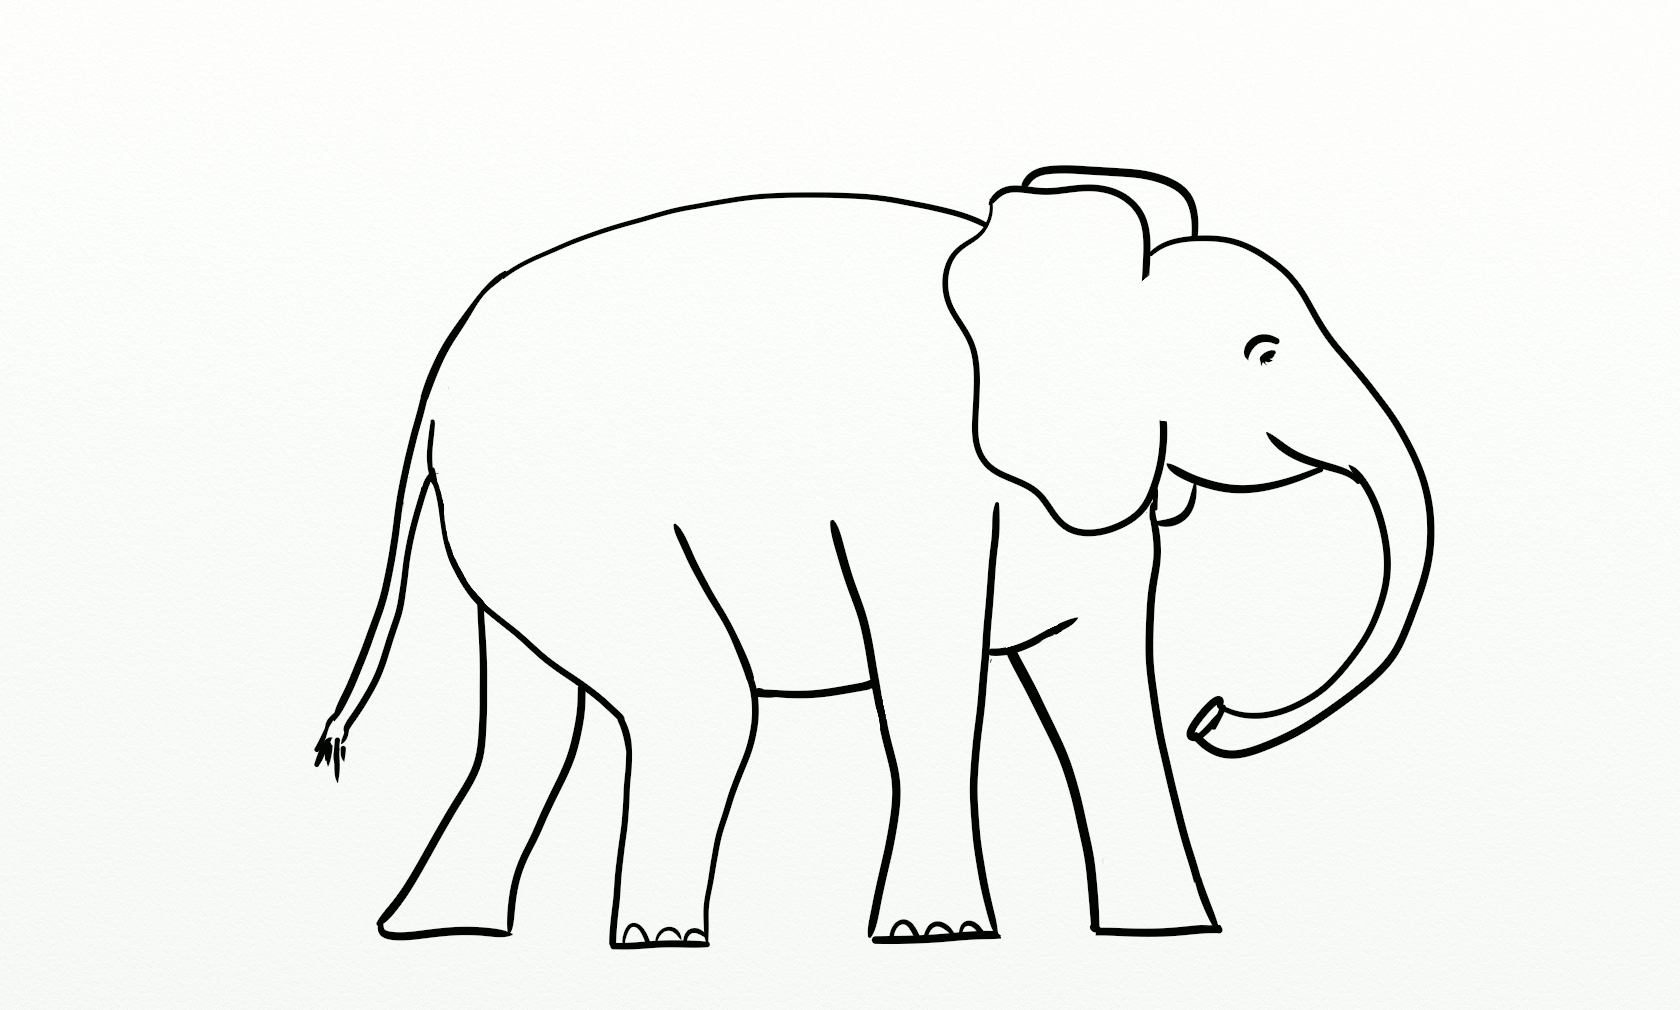 6 Best Images of Elephant Outline Printable Elephant Outline